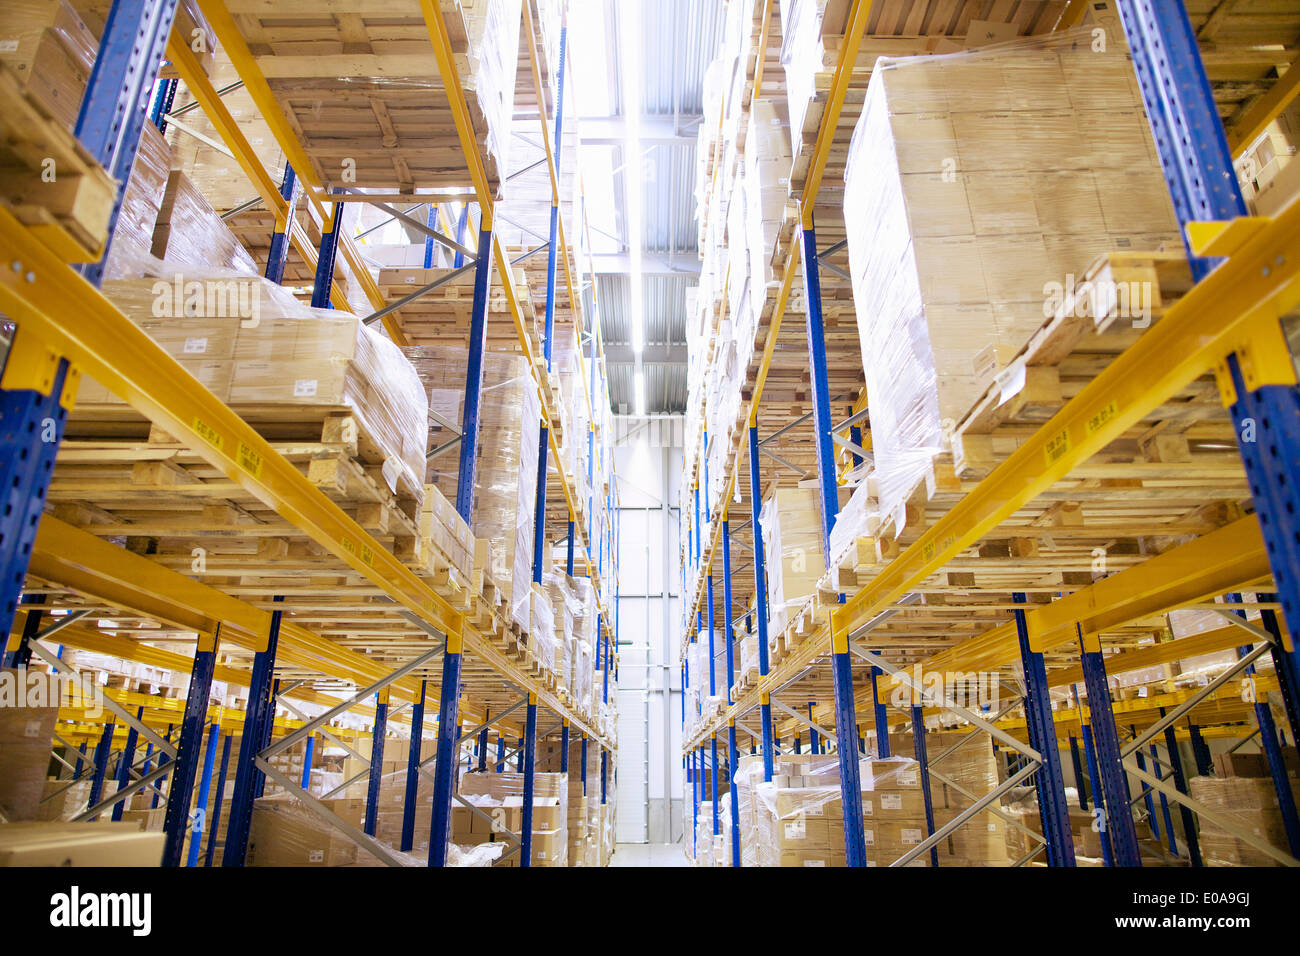 Stacked shelves in distribution warehouse Stock Photo